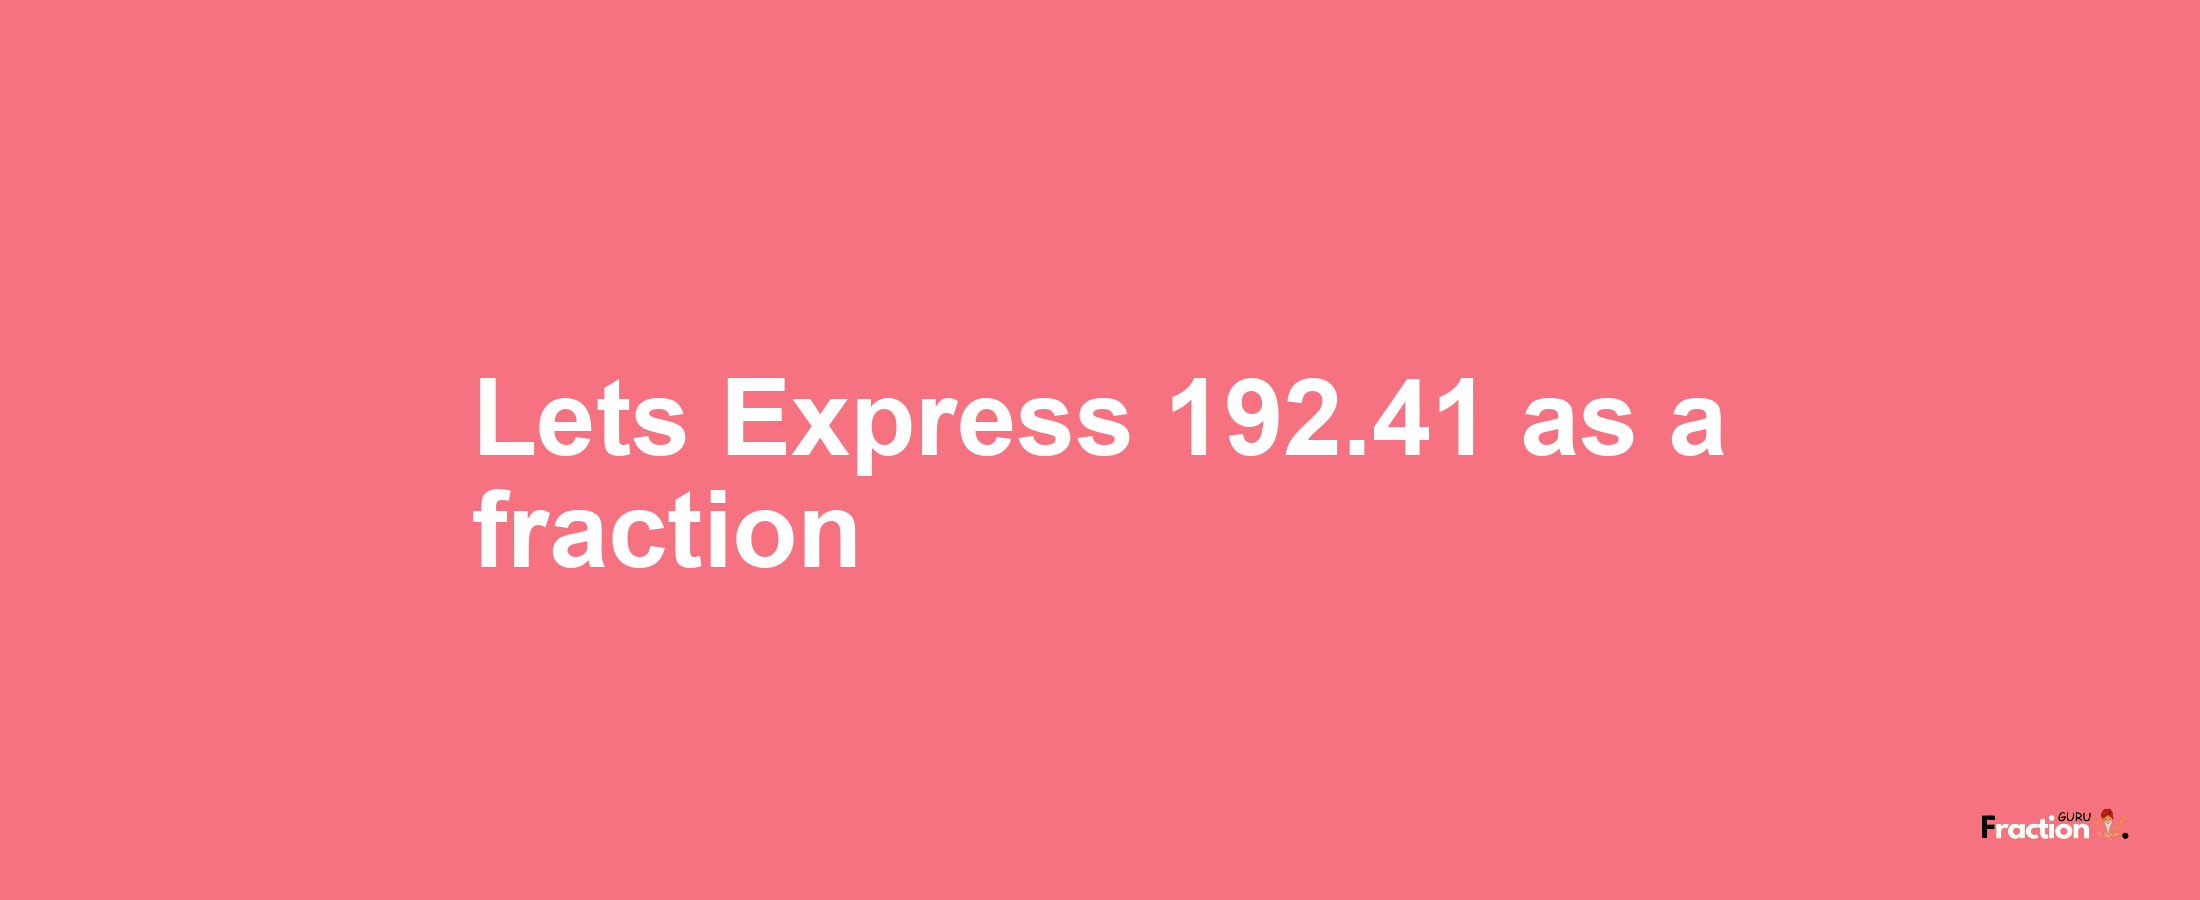 Lets Express 192.41 as afraction